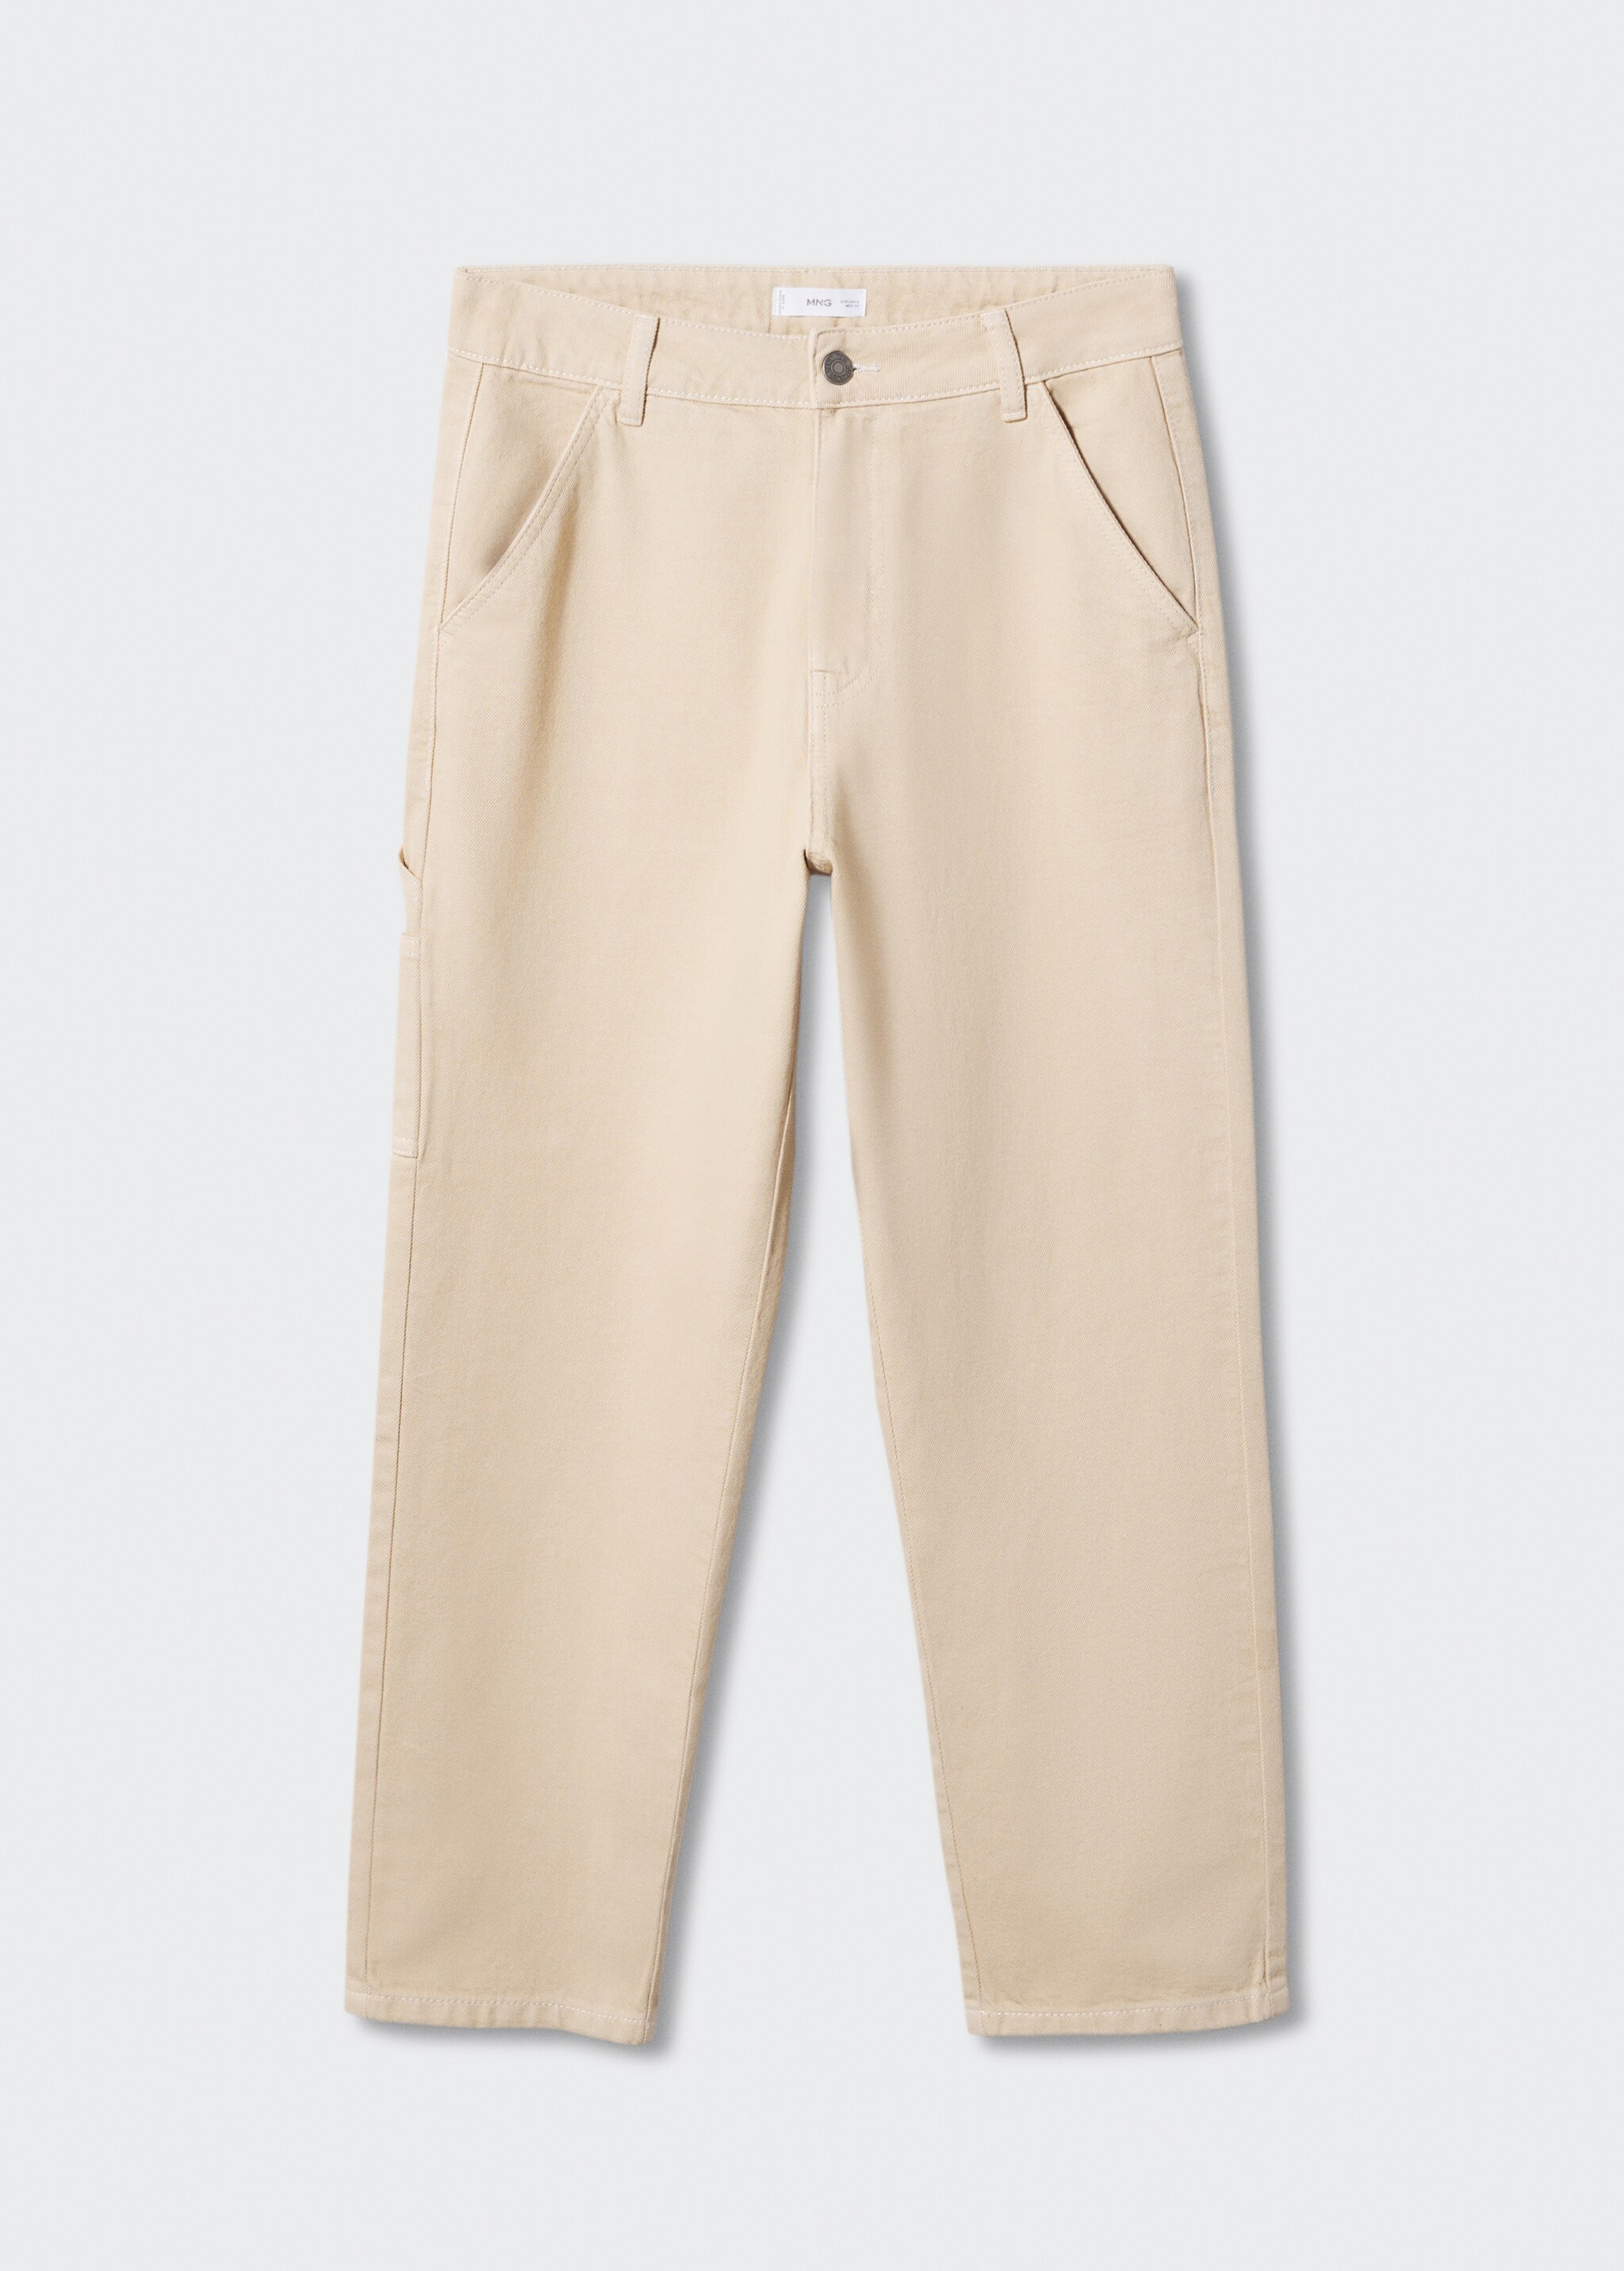 Pocket cargo pants - Article without model